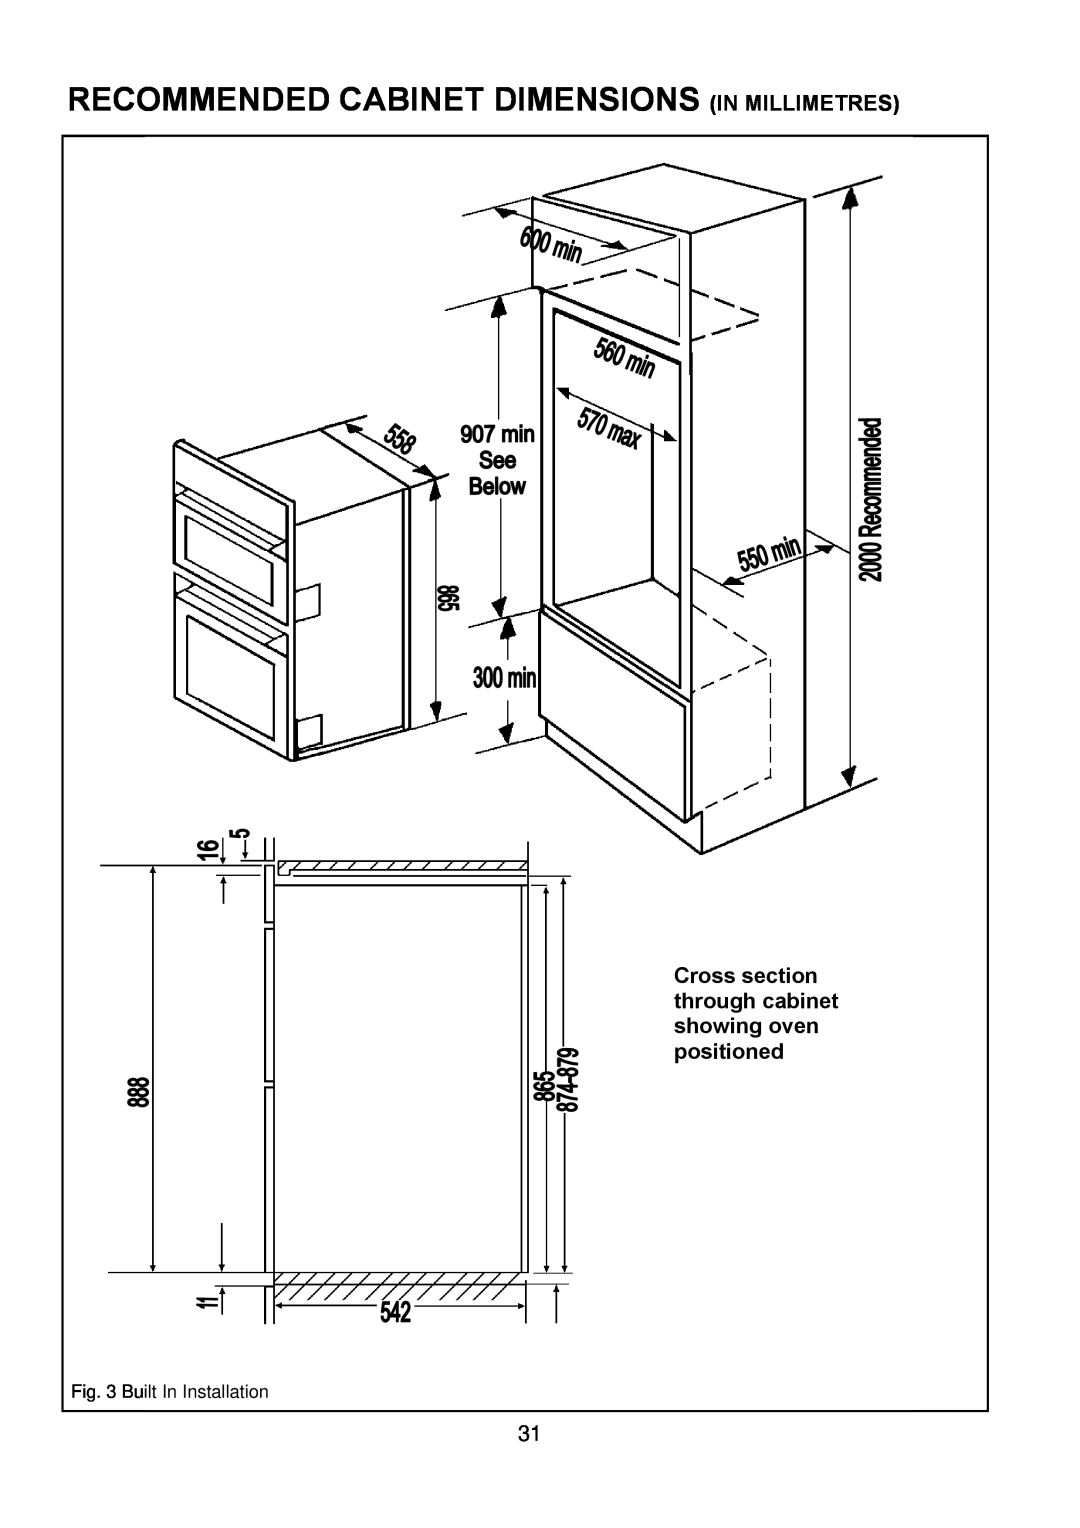 Zanussi ZDF 290 manual Recommended Cabinet Dimensions In Millimetres, Cross section through cabinet showing oven positioned 